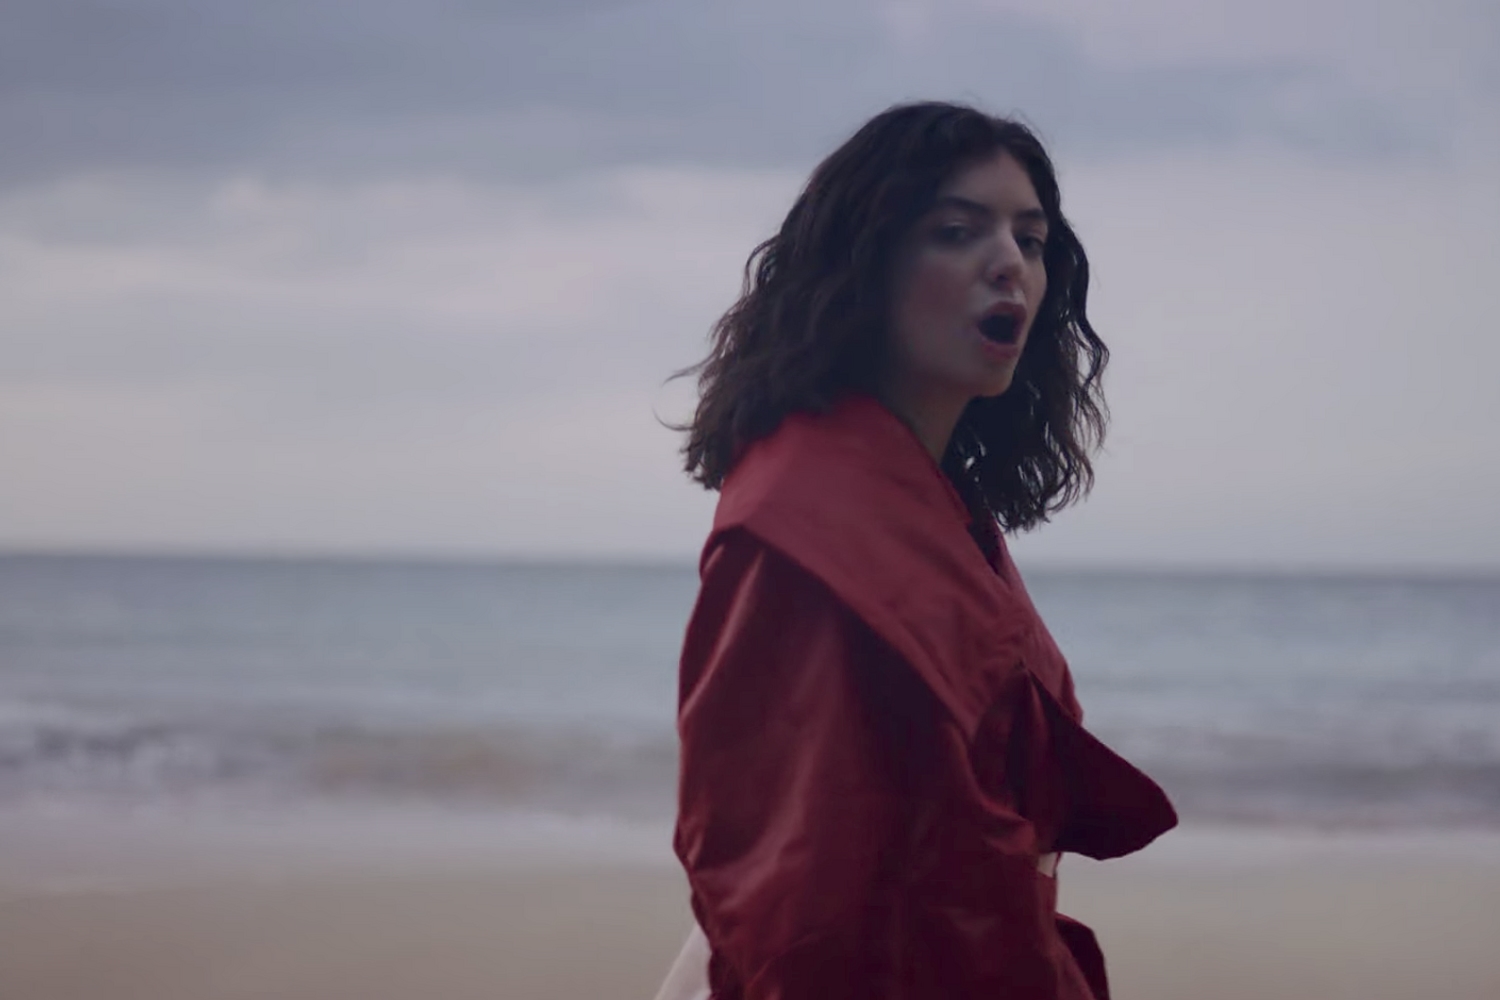 Lorde goes on her hols for ‘Perfect Places’ video